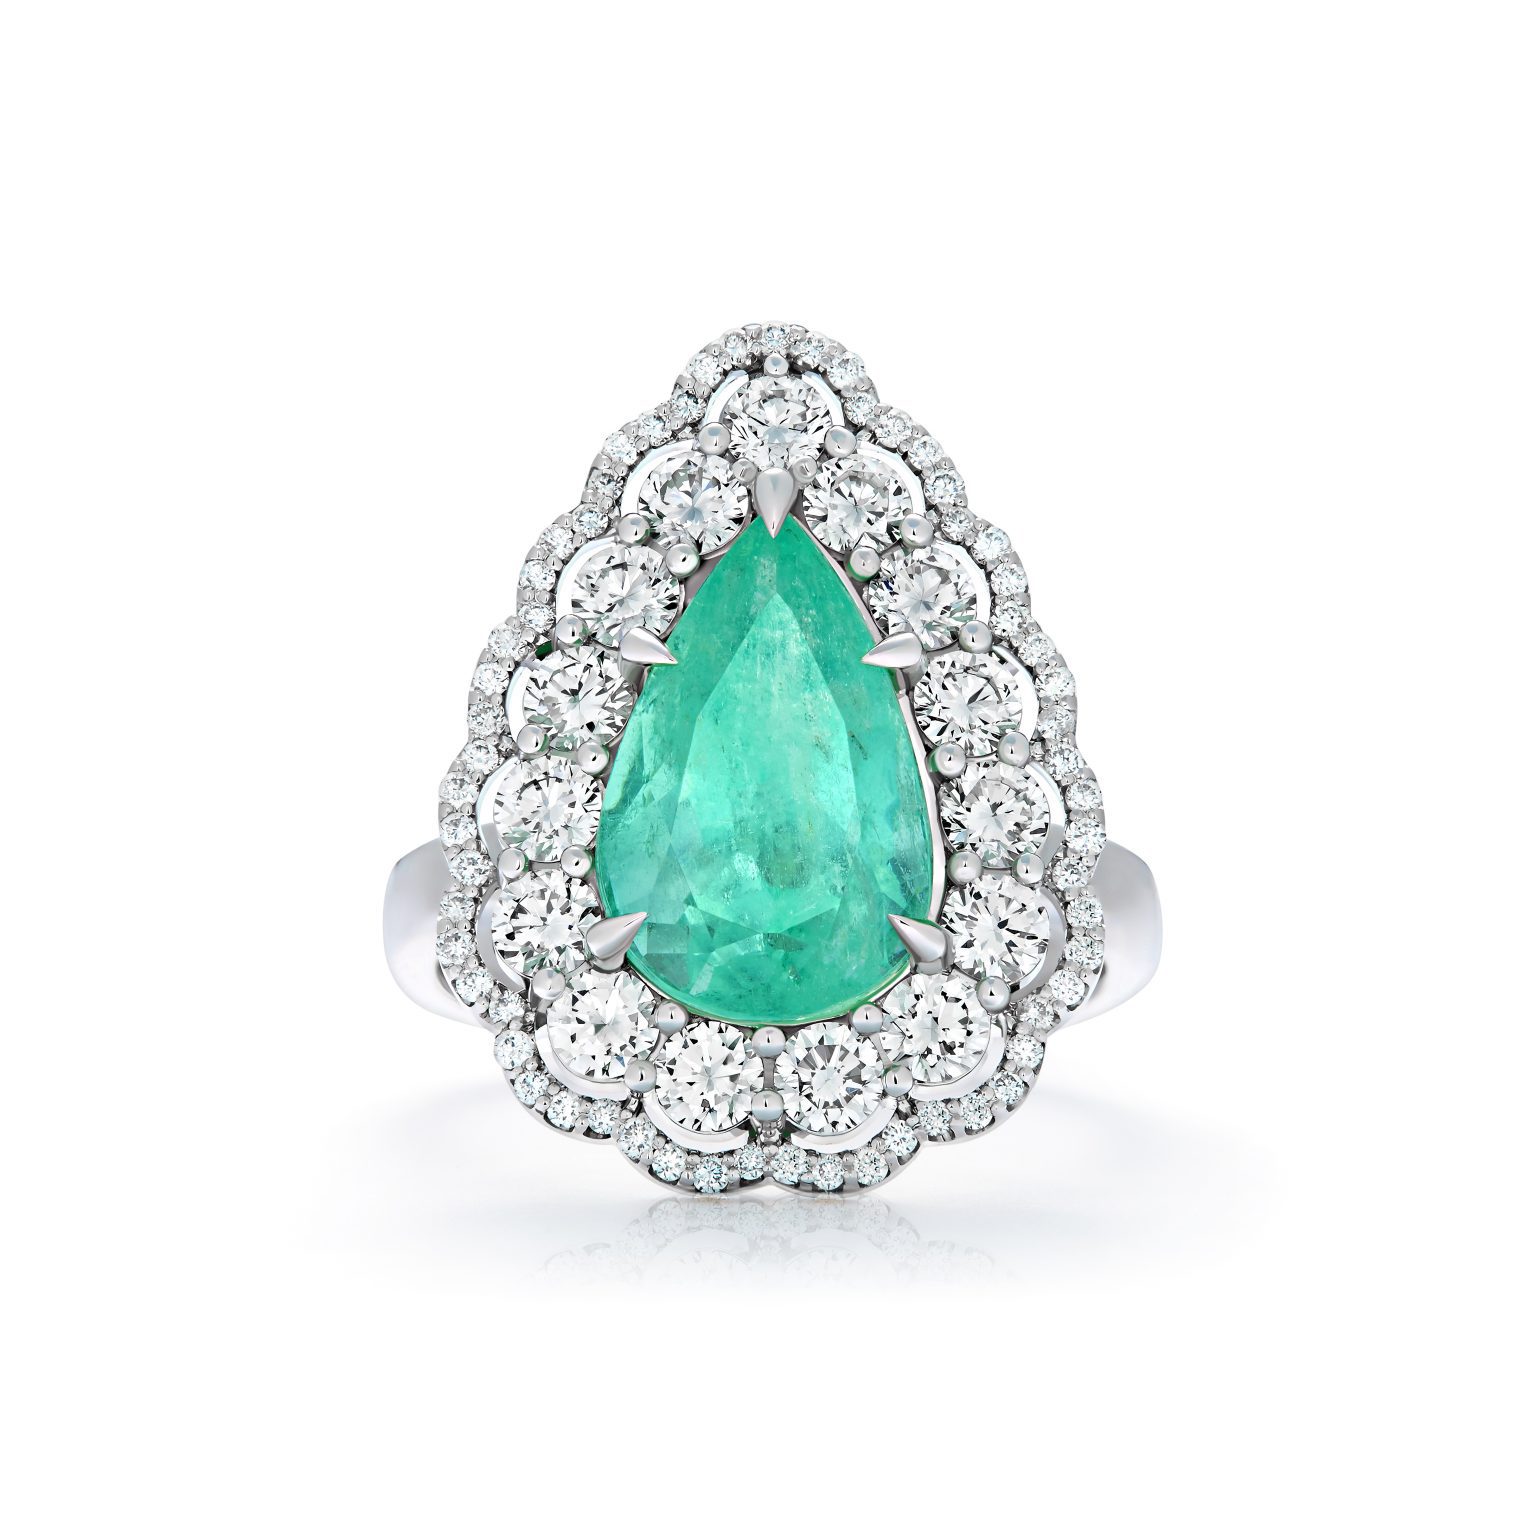 4.88 ct Pear Shaped Colombian Emerald Ring